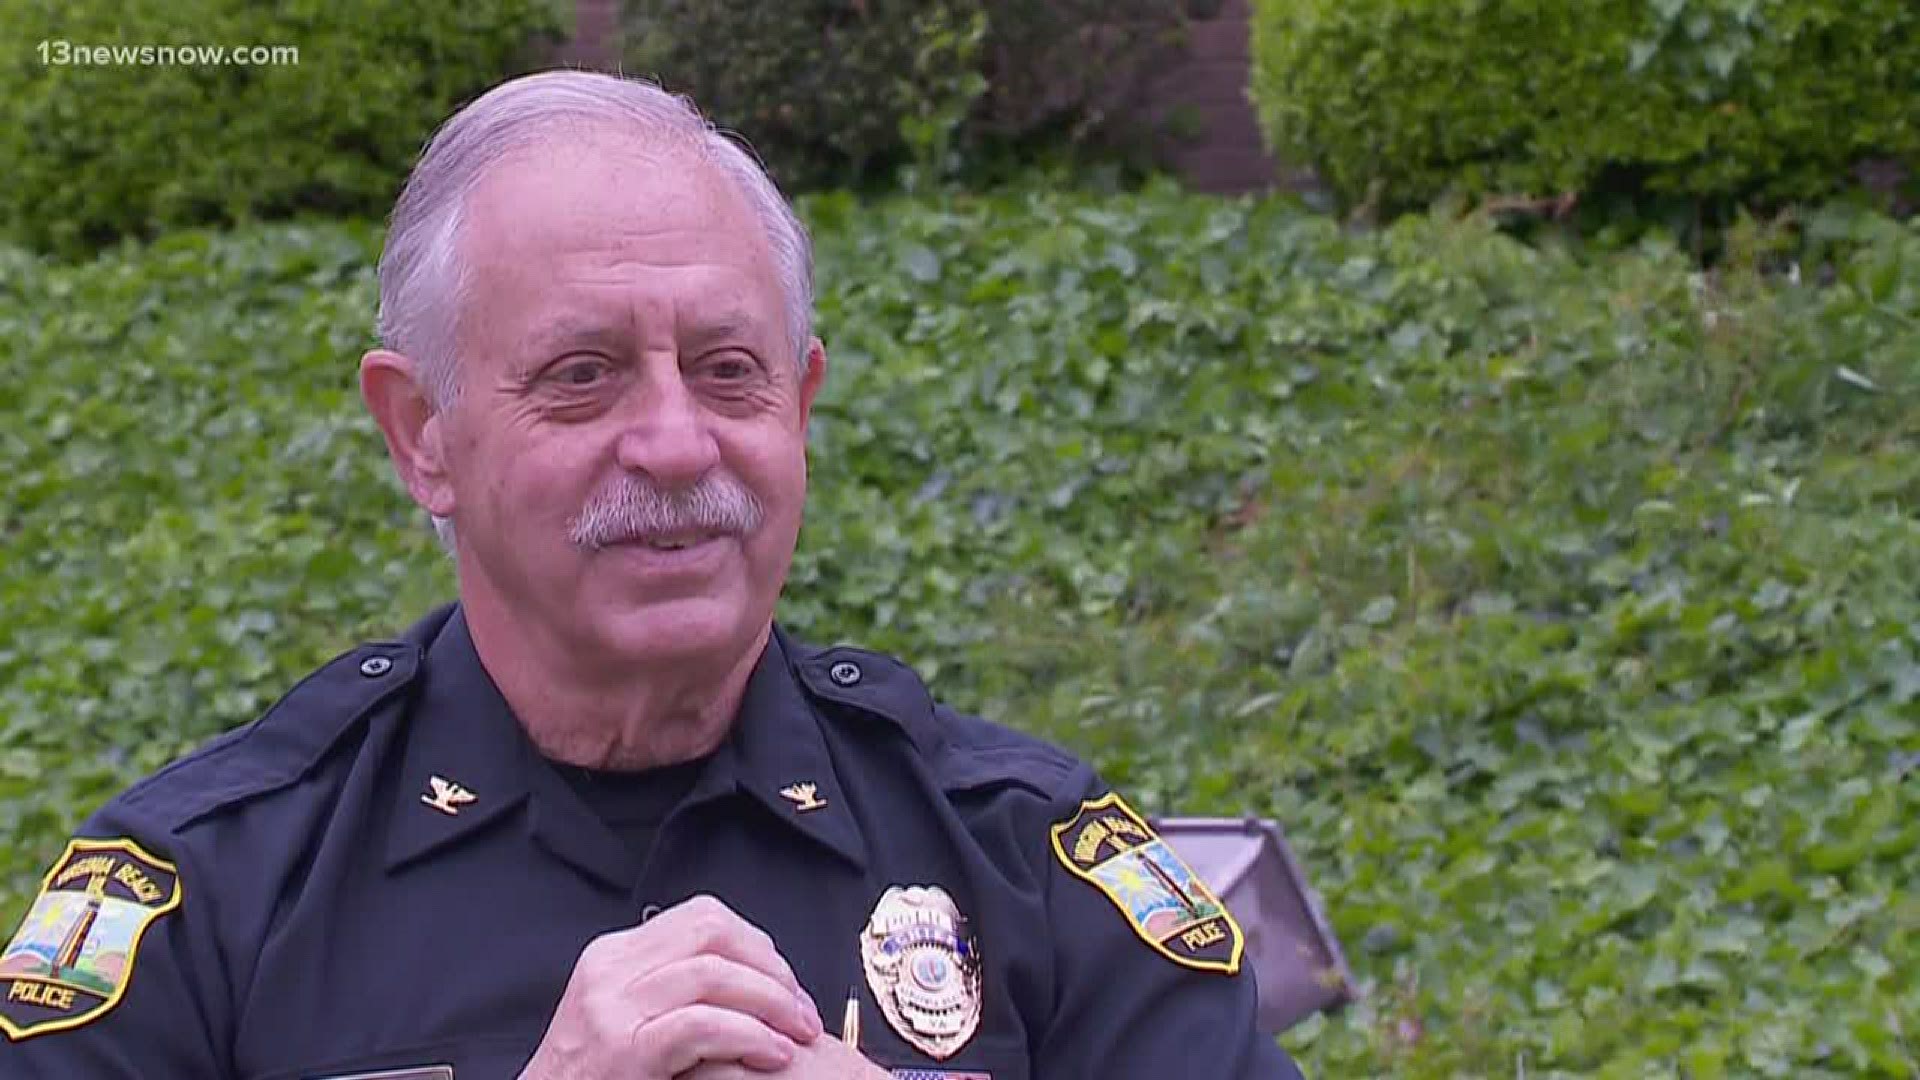 After 44 years on the beat, Virginia Beach Police Chief Jim Cervera looks ahead at "Chapter 2" of his life.